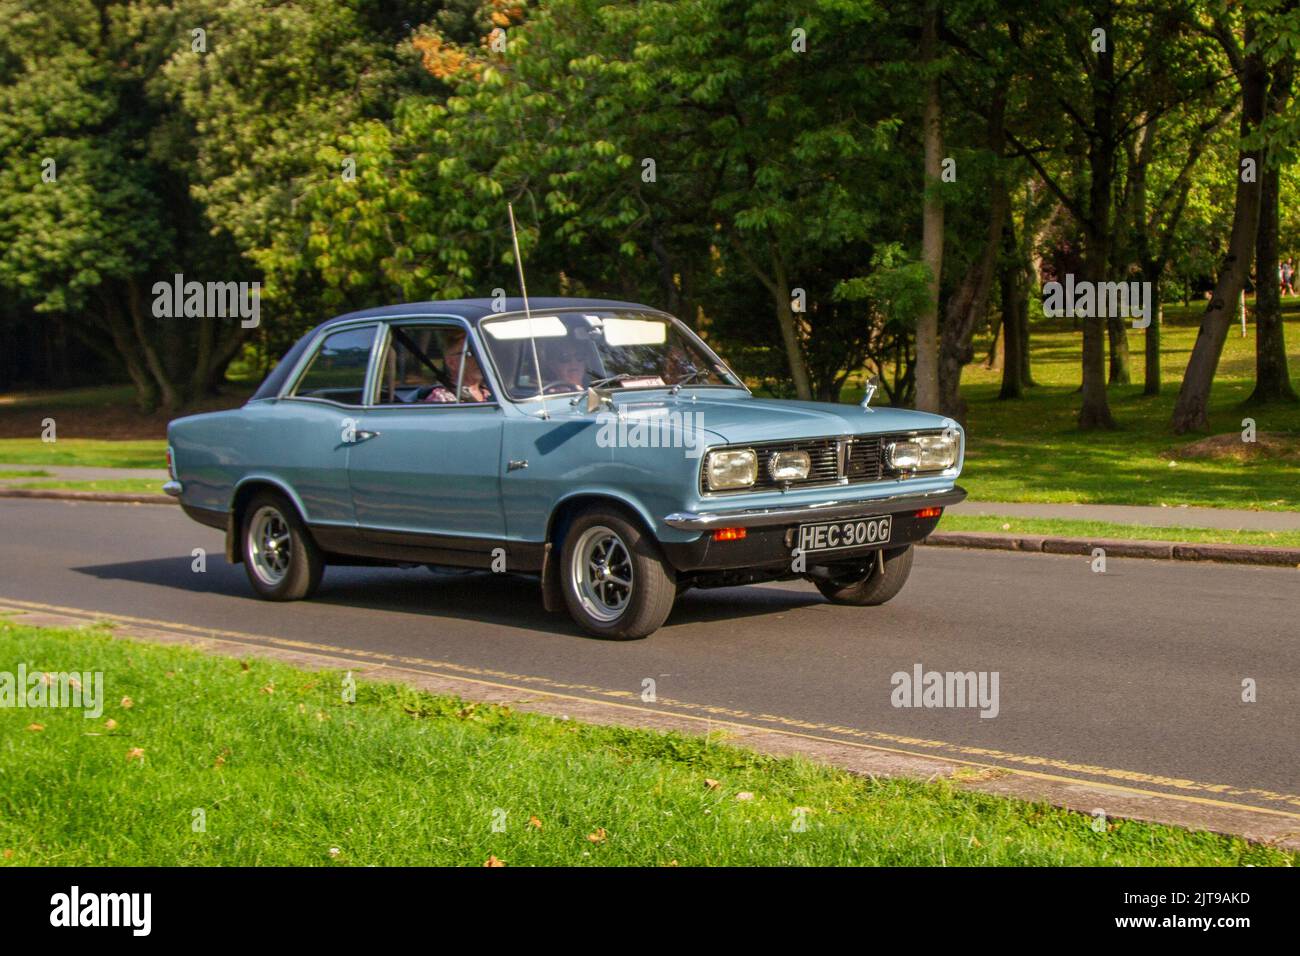 1969 60s sixties Blue VAUXHALL VIVA 1589cc; arriving at the annual Stanley Park Classic Car Show in the Italian Gardens. Stanley Park classics yesteryear Motor Show Hosted By Blackpool Vintage Vehicle Preservation Group, UK. Stock Photo